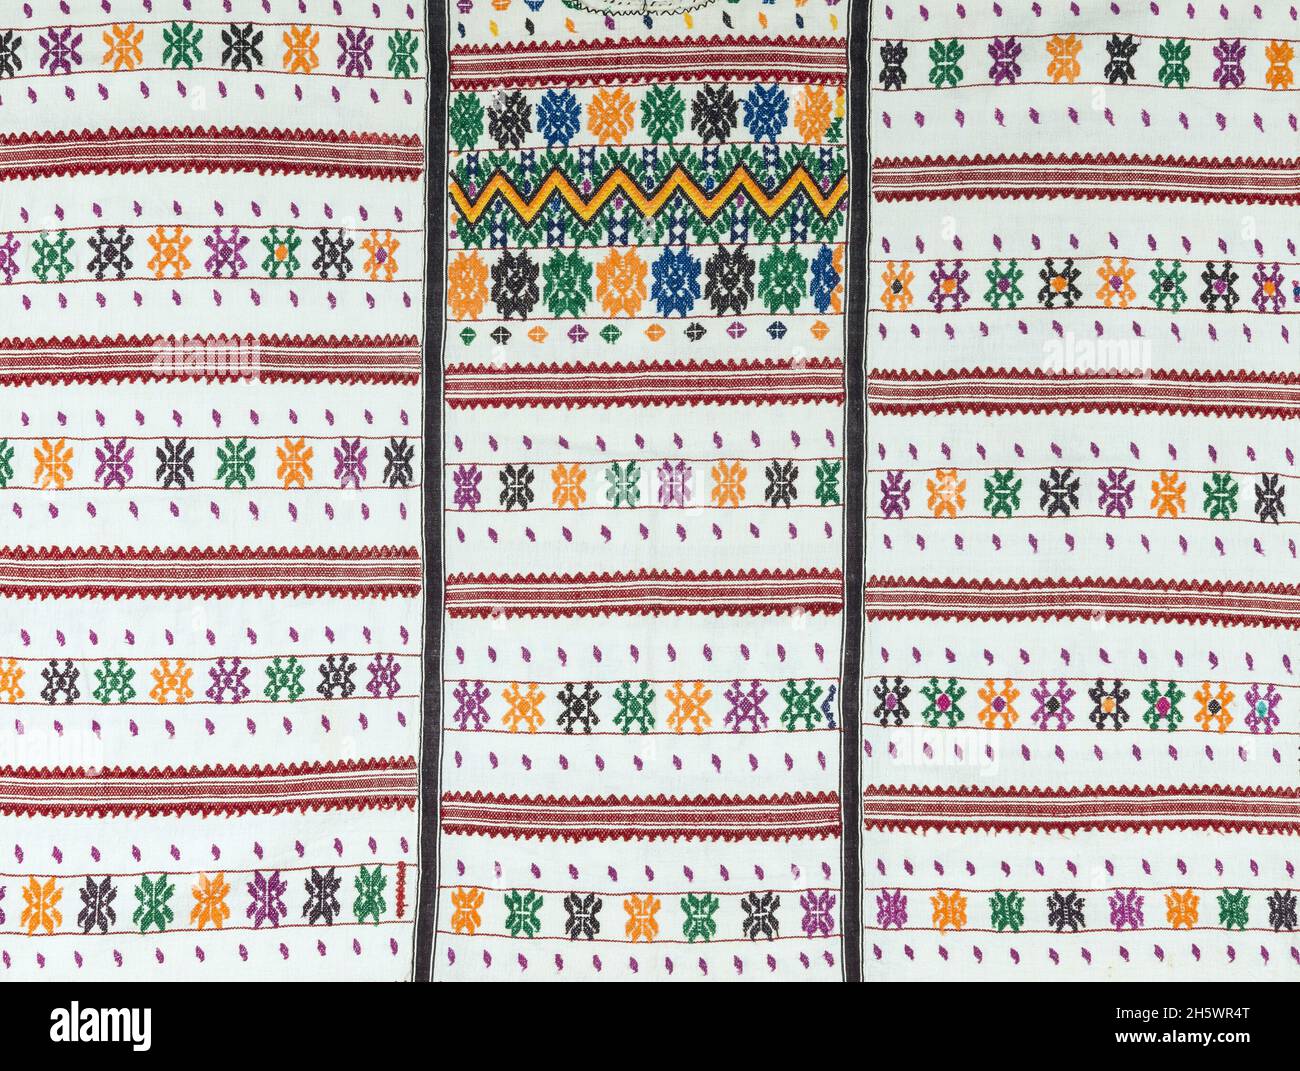 Detail of a huipil (women's blouse-type garment) constructed from 3 panels of hip-strap loom woven fabric. Traditional / everyday costume of the Mixtec communities of Oaxaca, Mexico. In Mixtec, the huipil is also called 'Shiku lestu'. Stock Photo